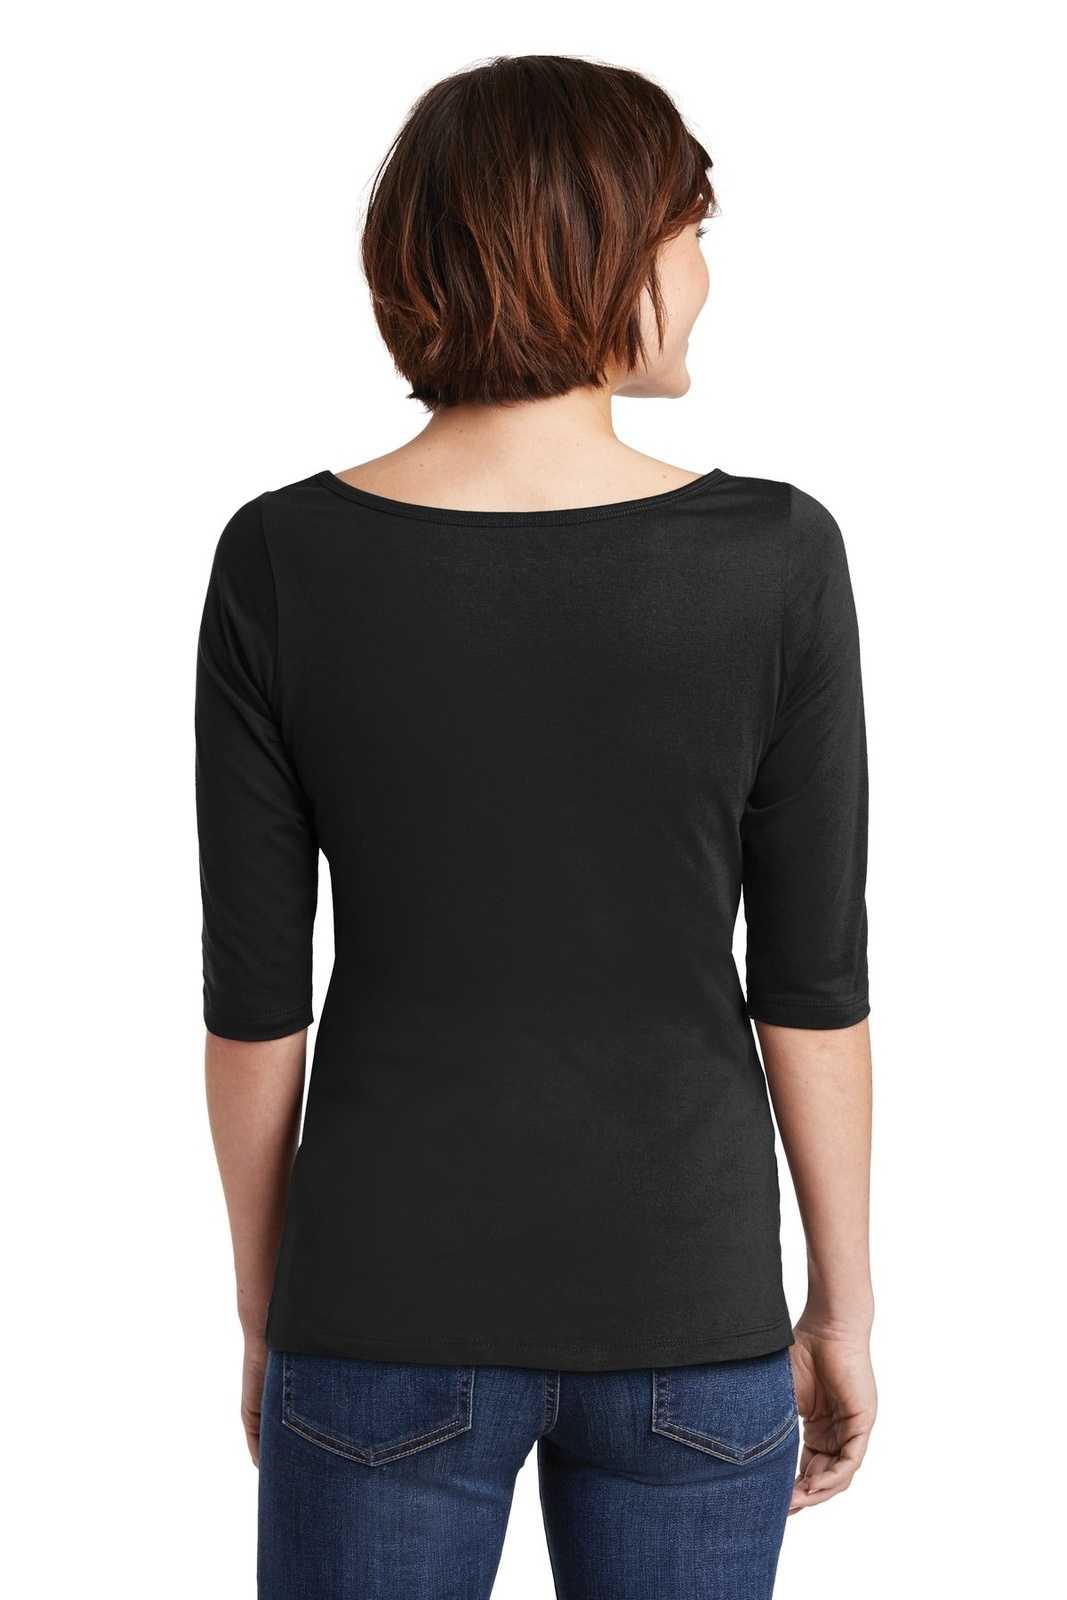 District DM107L Women's Perfect Weight 3/4-Sleeve Tee - Jet Black - HIT a Double - 1